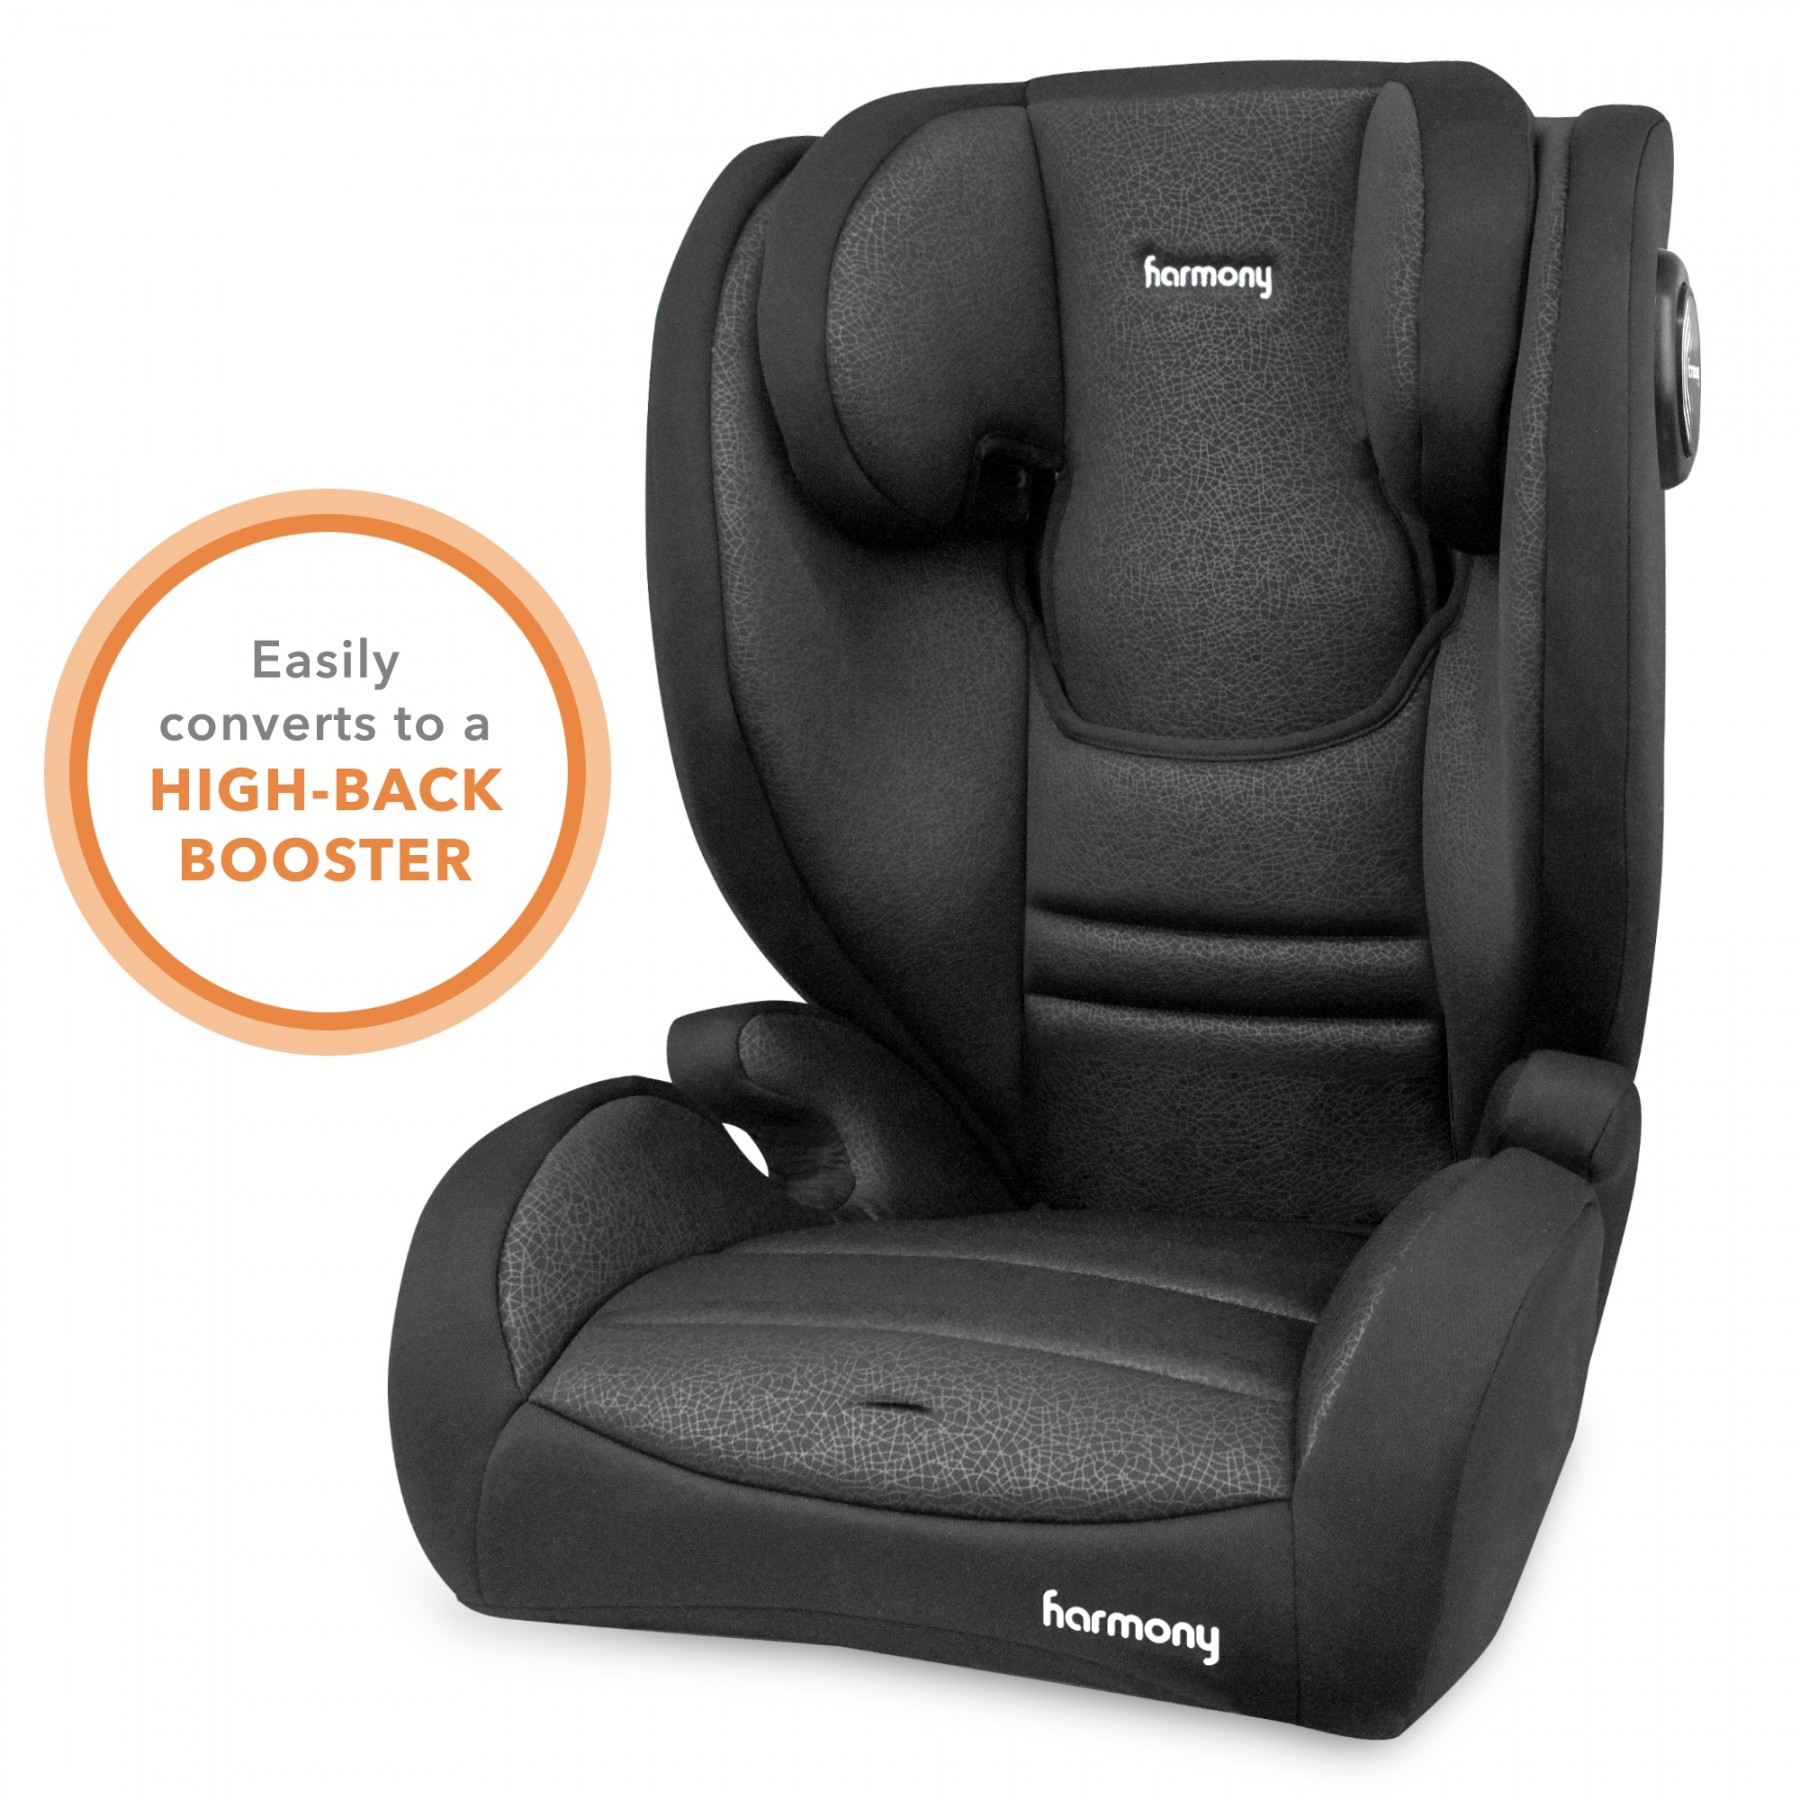 Genesys Deluxe i-Size Harnessed Booster Car Seat